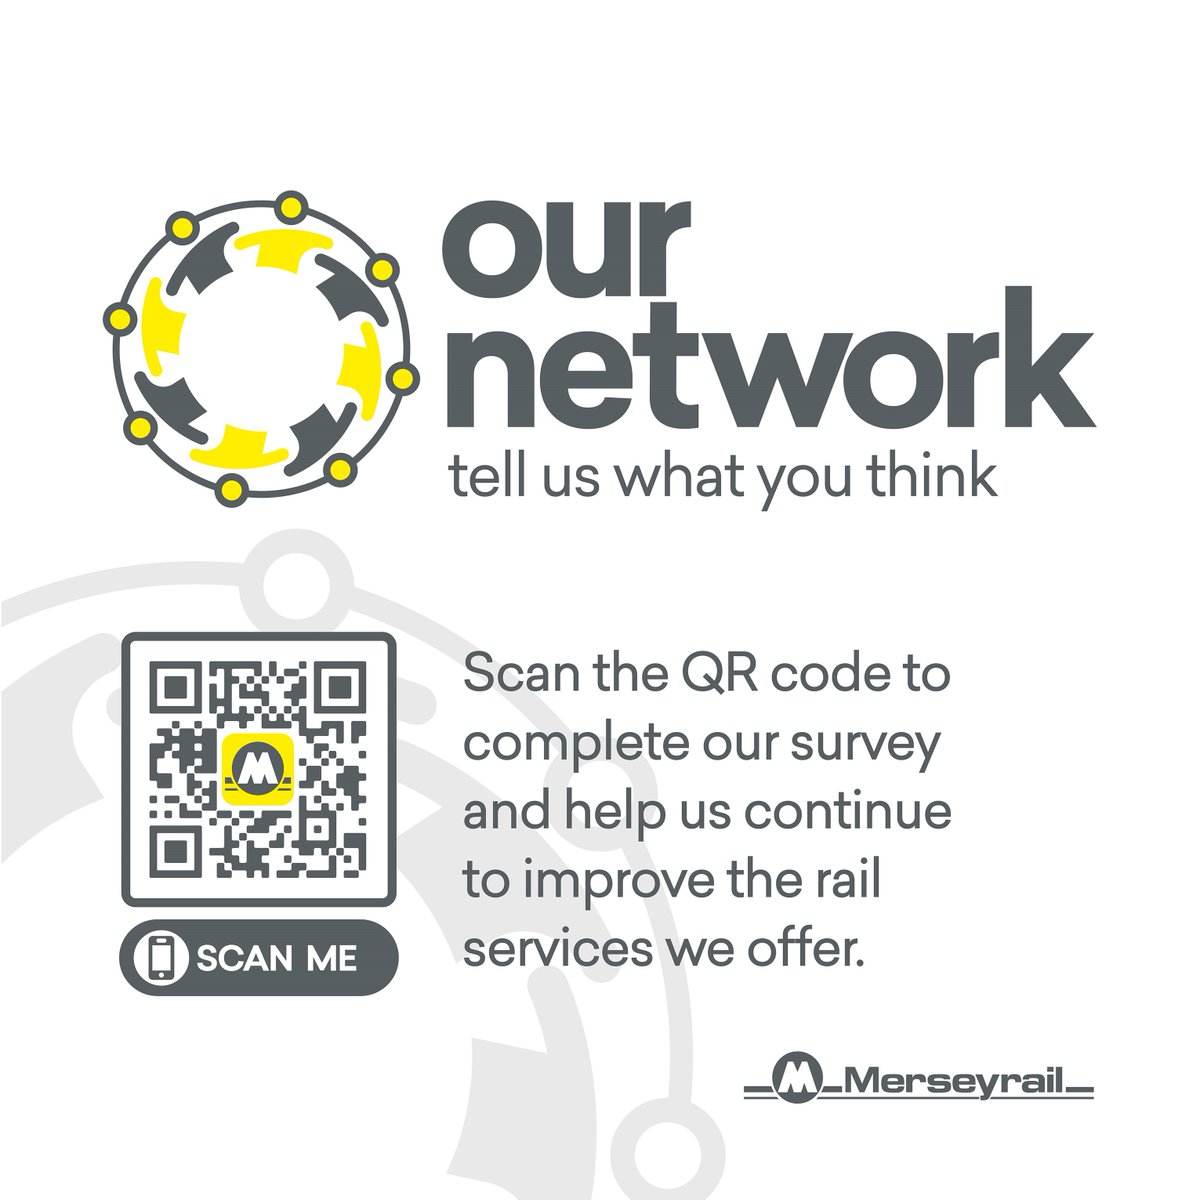 Introducing the new 'Our Network' survey, designed with you in mind to enhance your journey with Merseyrail. Share your thoughts and experiences every time you travel to help us shape a better network for you. 🔗 surveymonkey.com/r/ournetwork